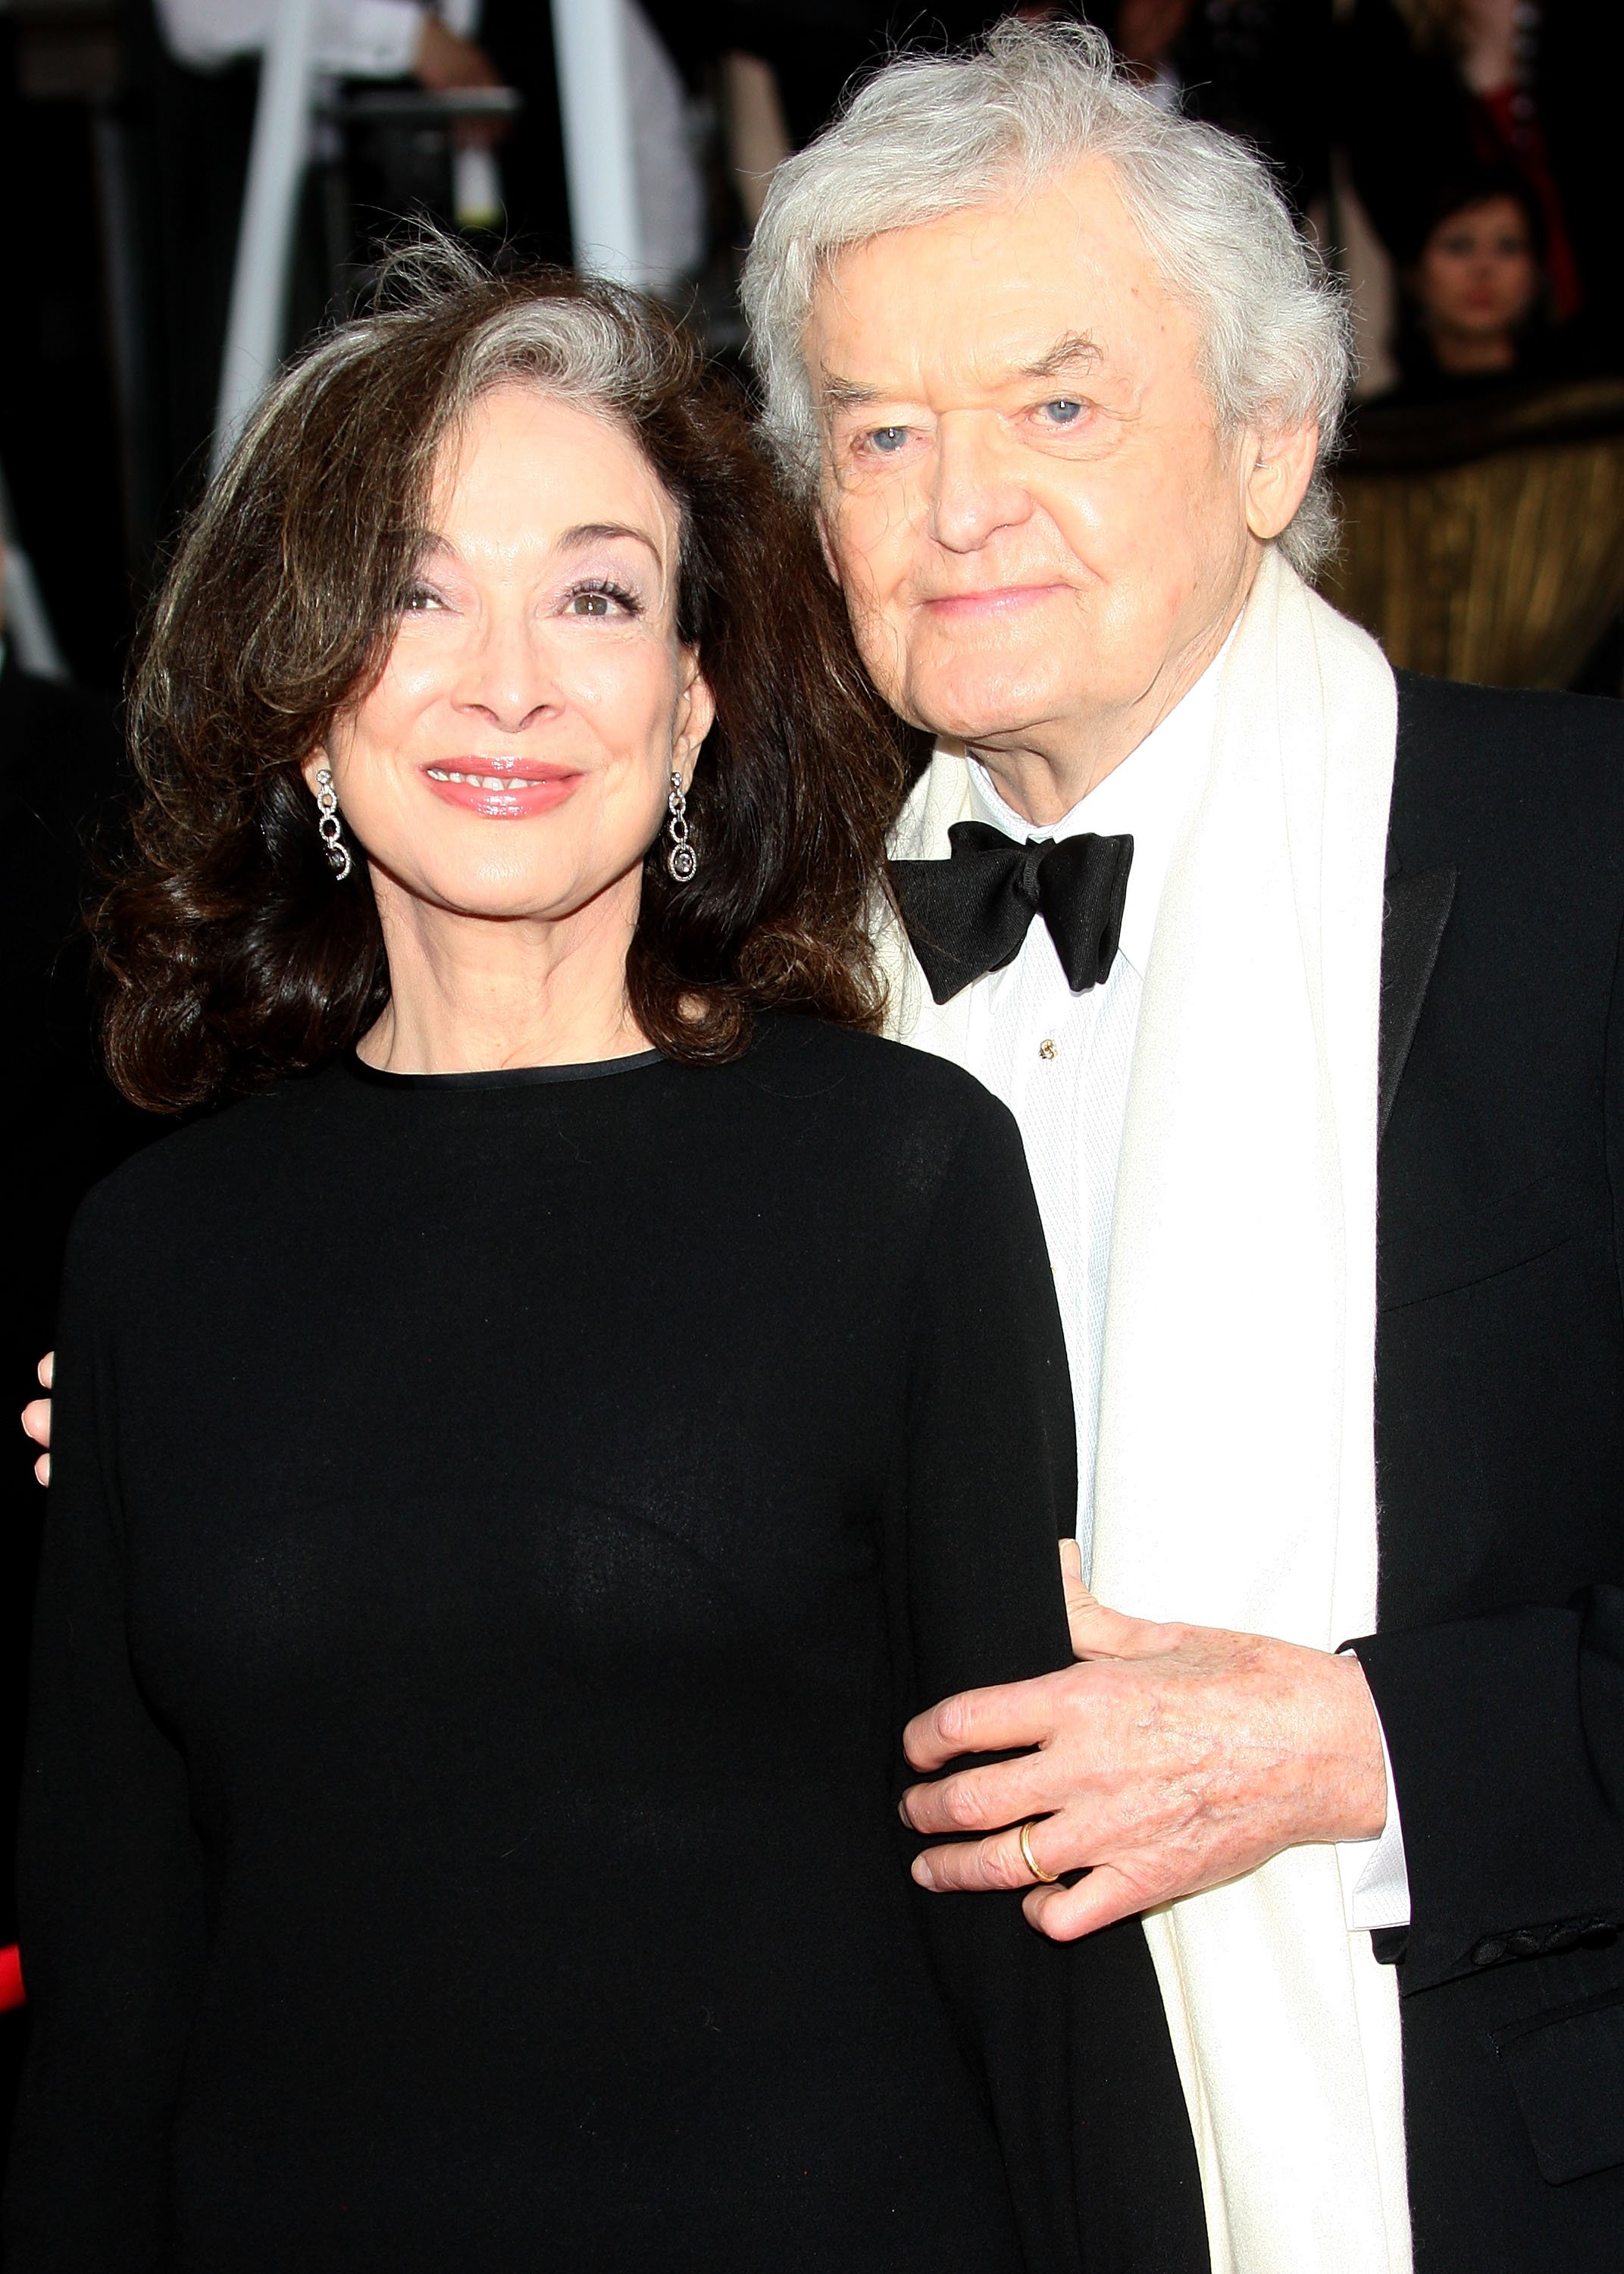  Actors Dixie Carter (L) and Hal Holbrook arrive at the 14th annual Screen Actors Guild awards held at the Shrine Auditorium on January 27, 2008 | Source: Getty Images